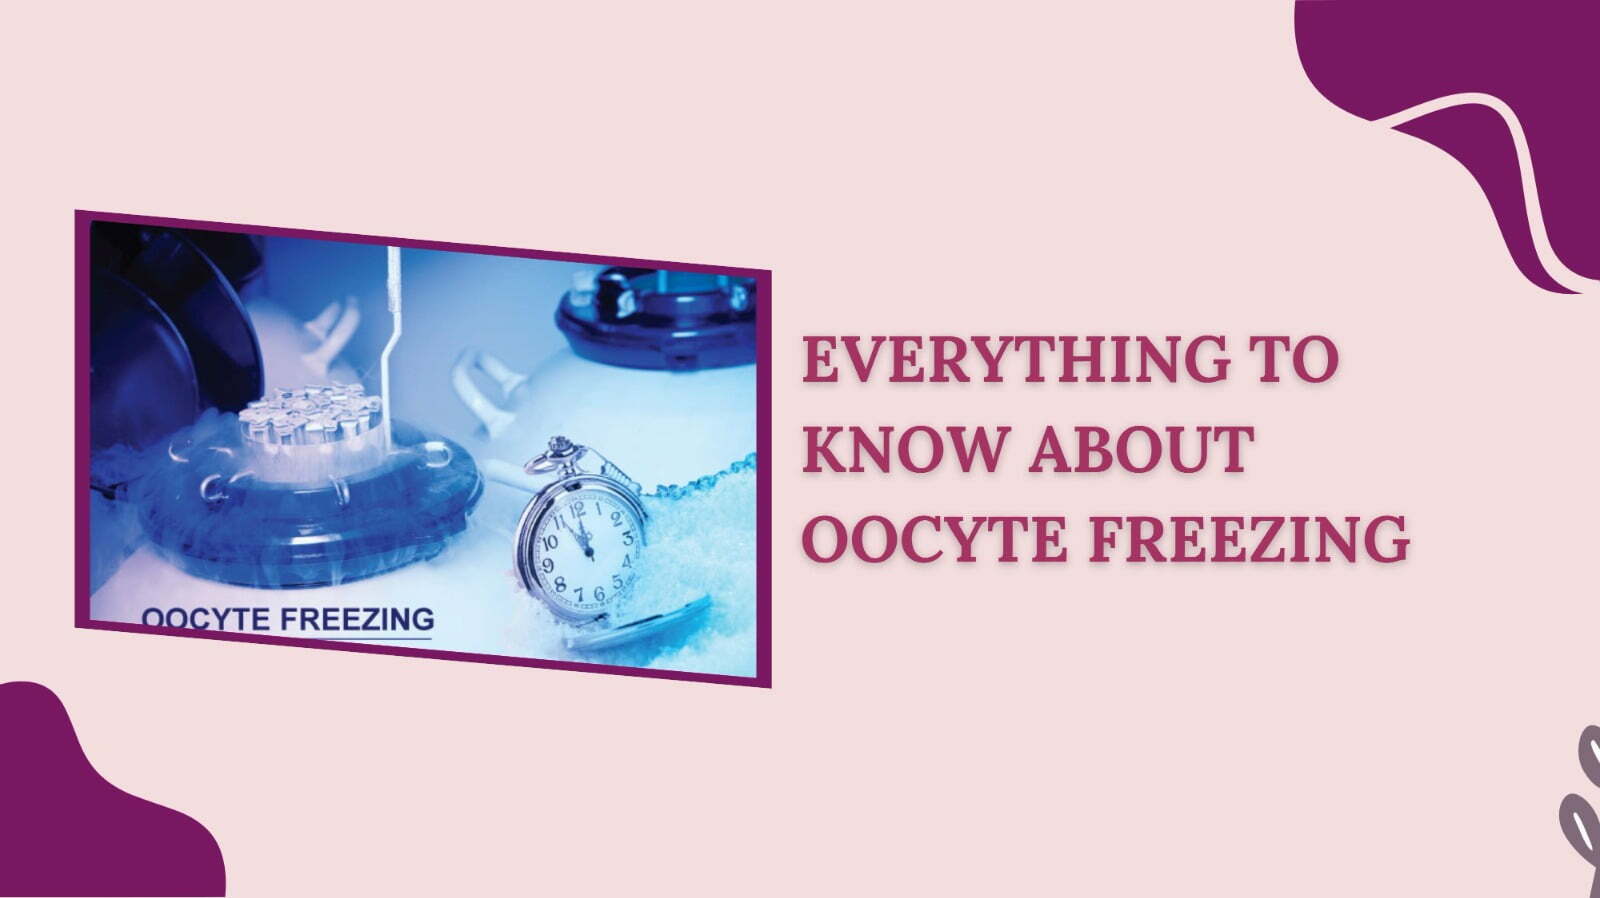 Everything to know about Oocyte freezing